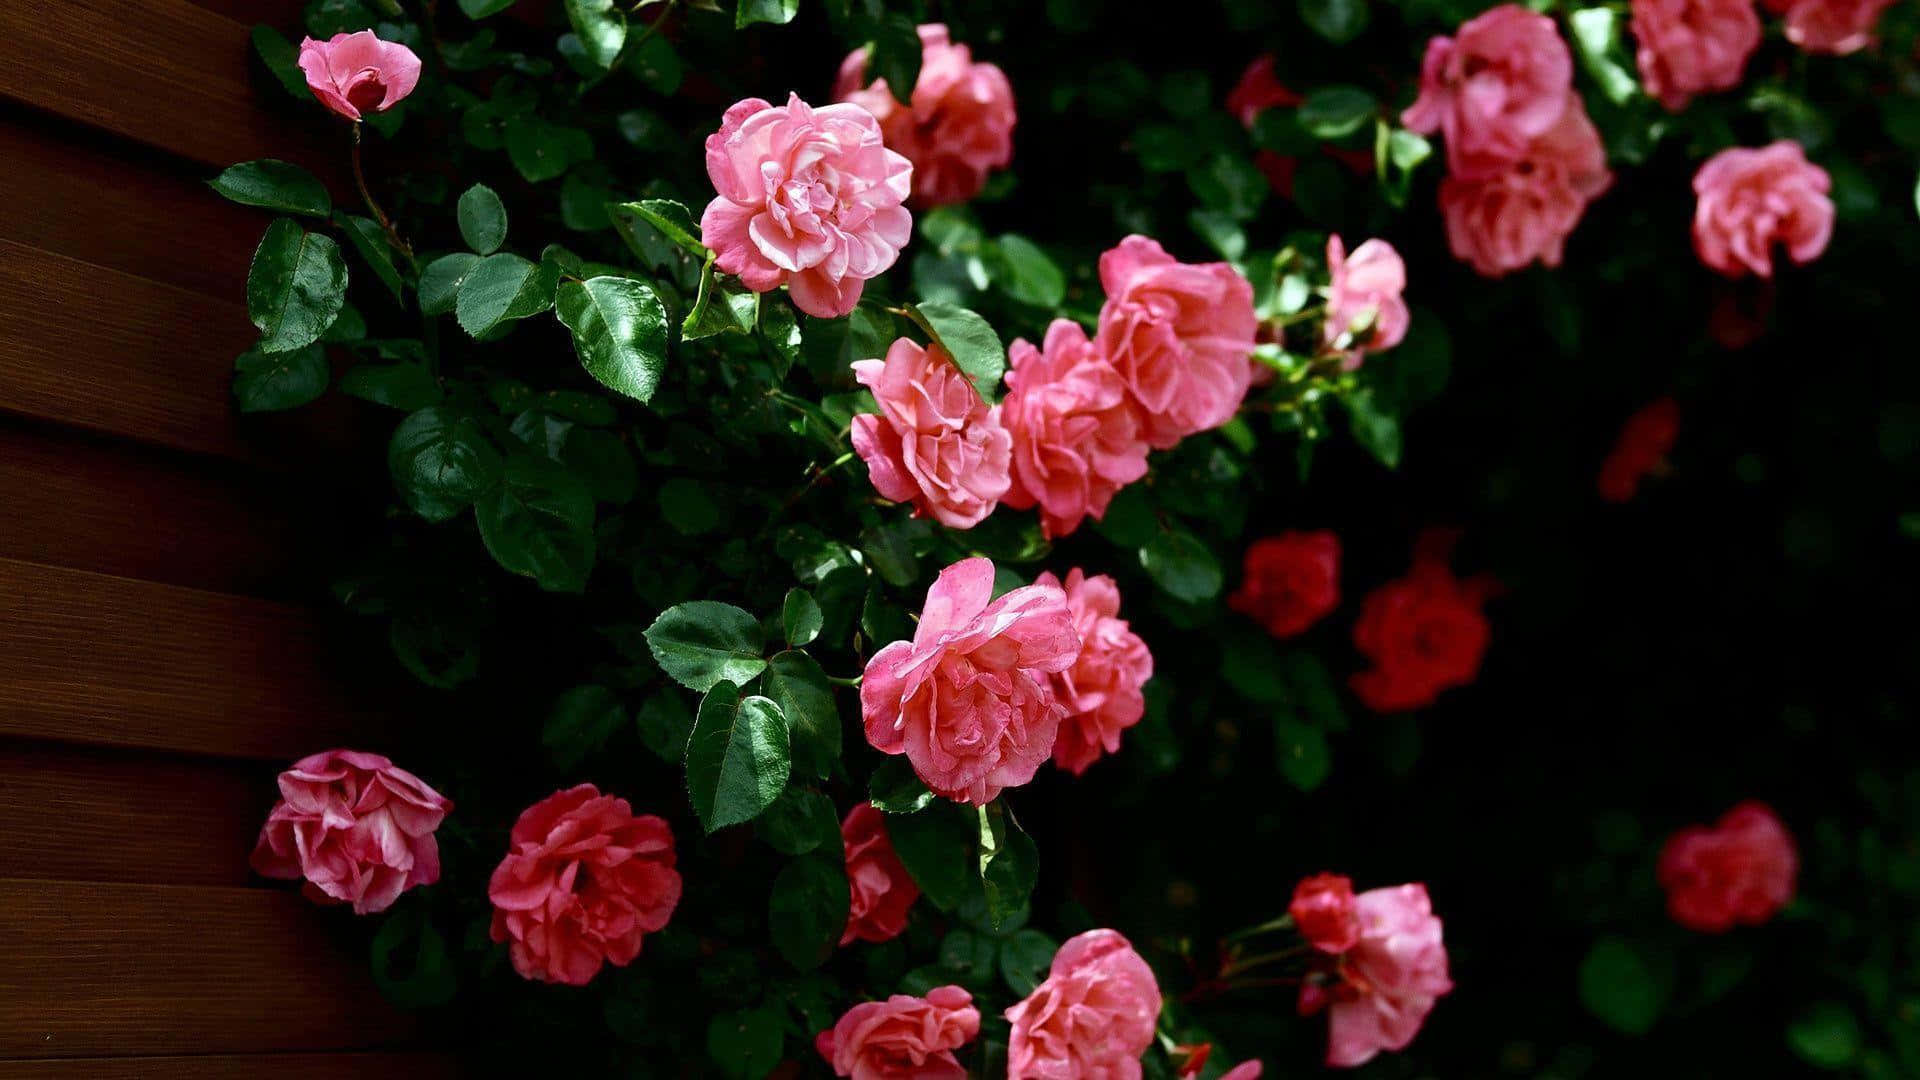 Pink Roses Growing On A Wall